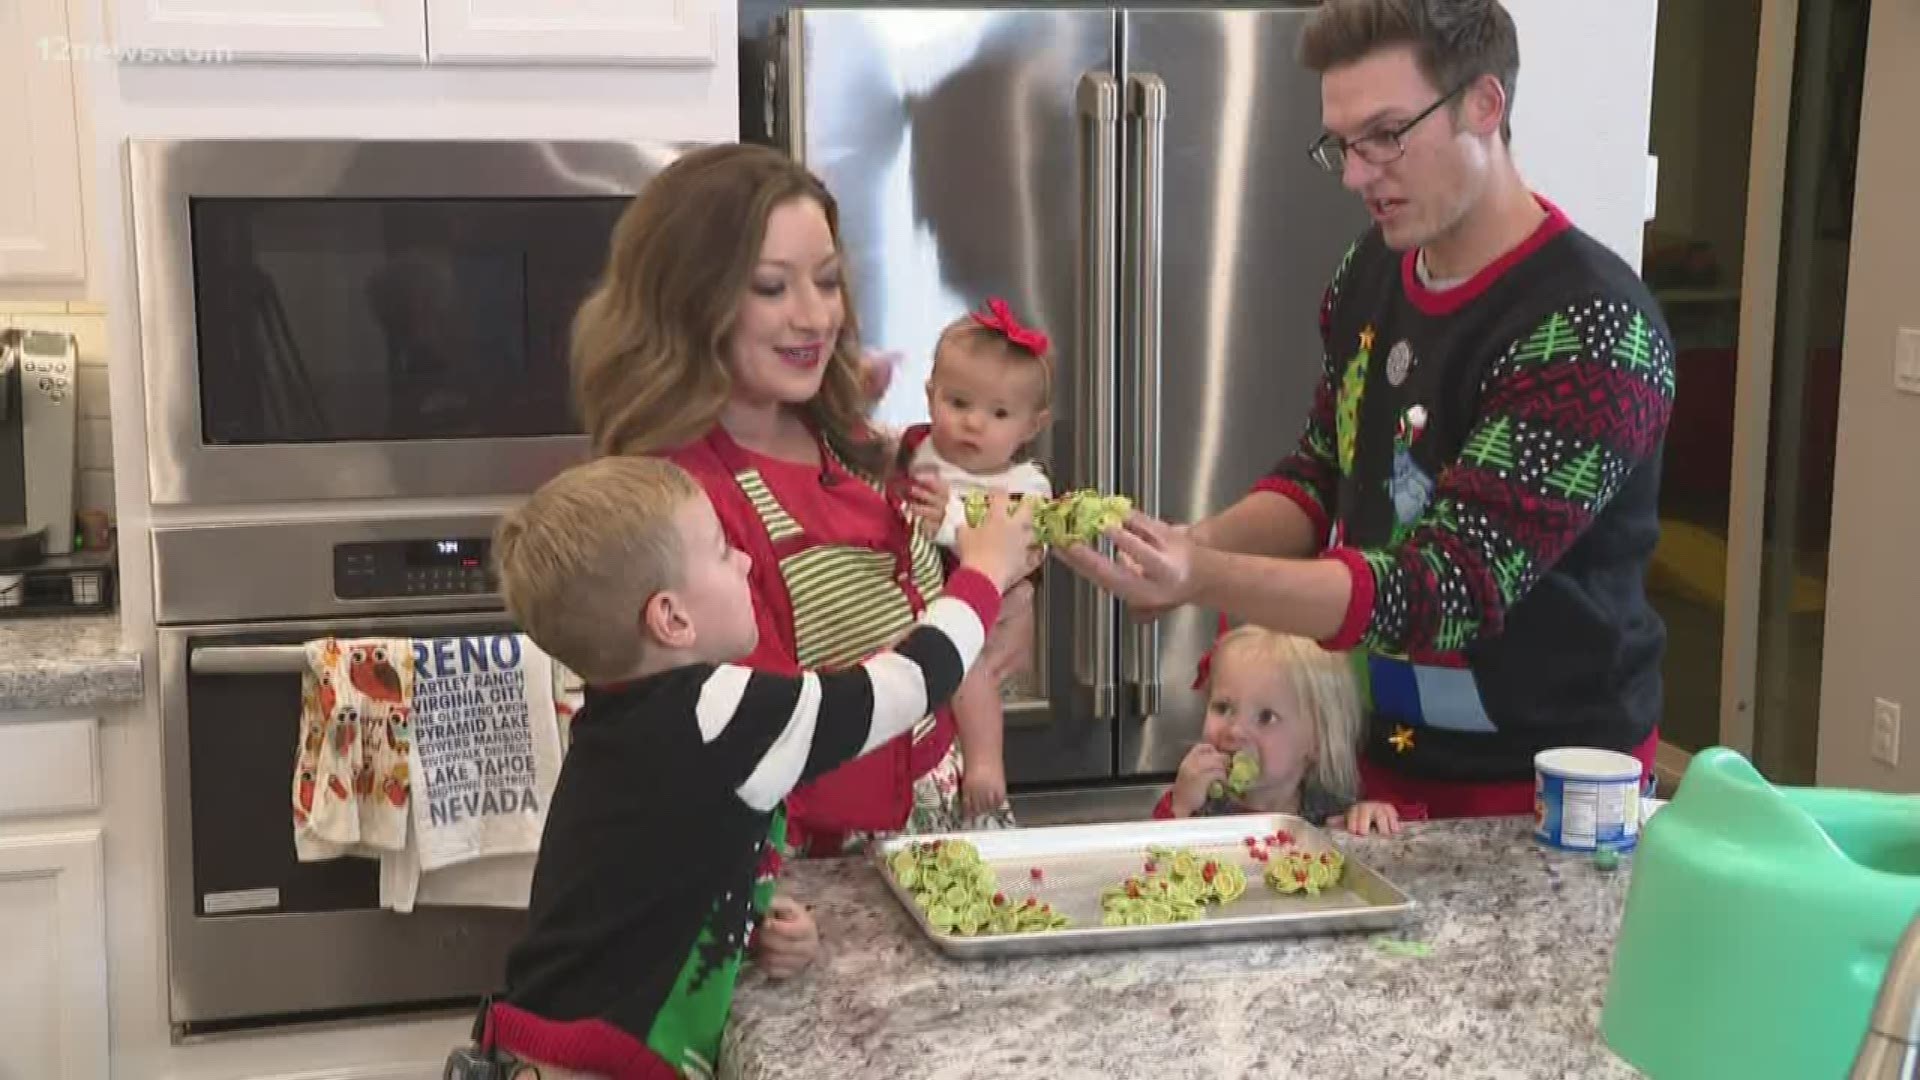 Jen Wahl shows us how to make Christmas wreath treats. They look delicious!